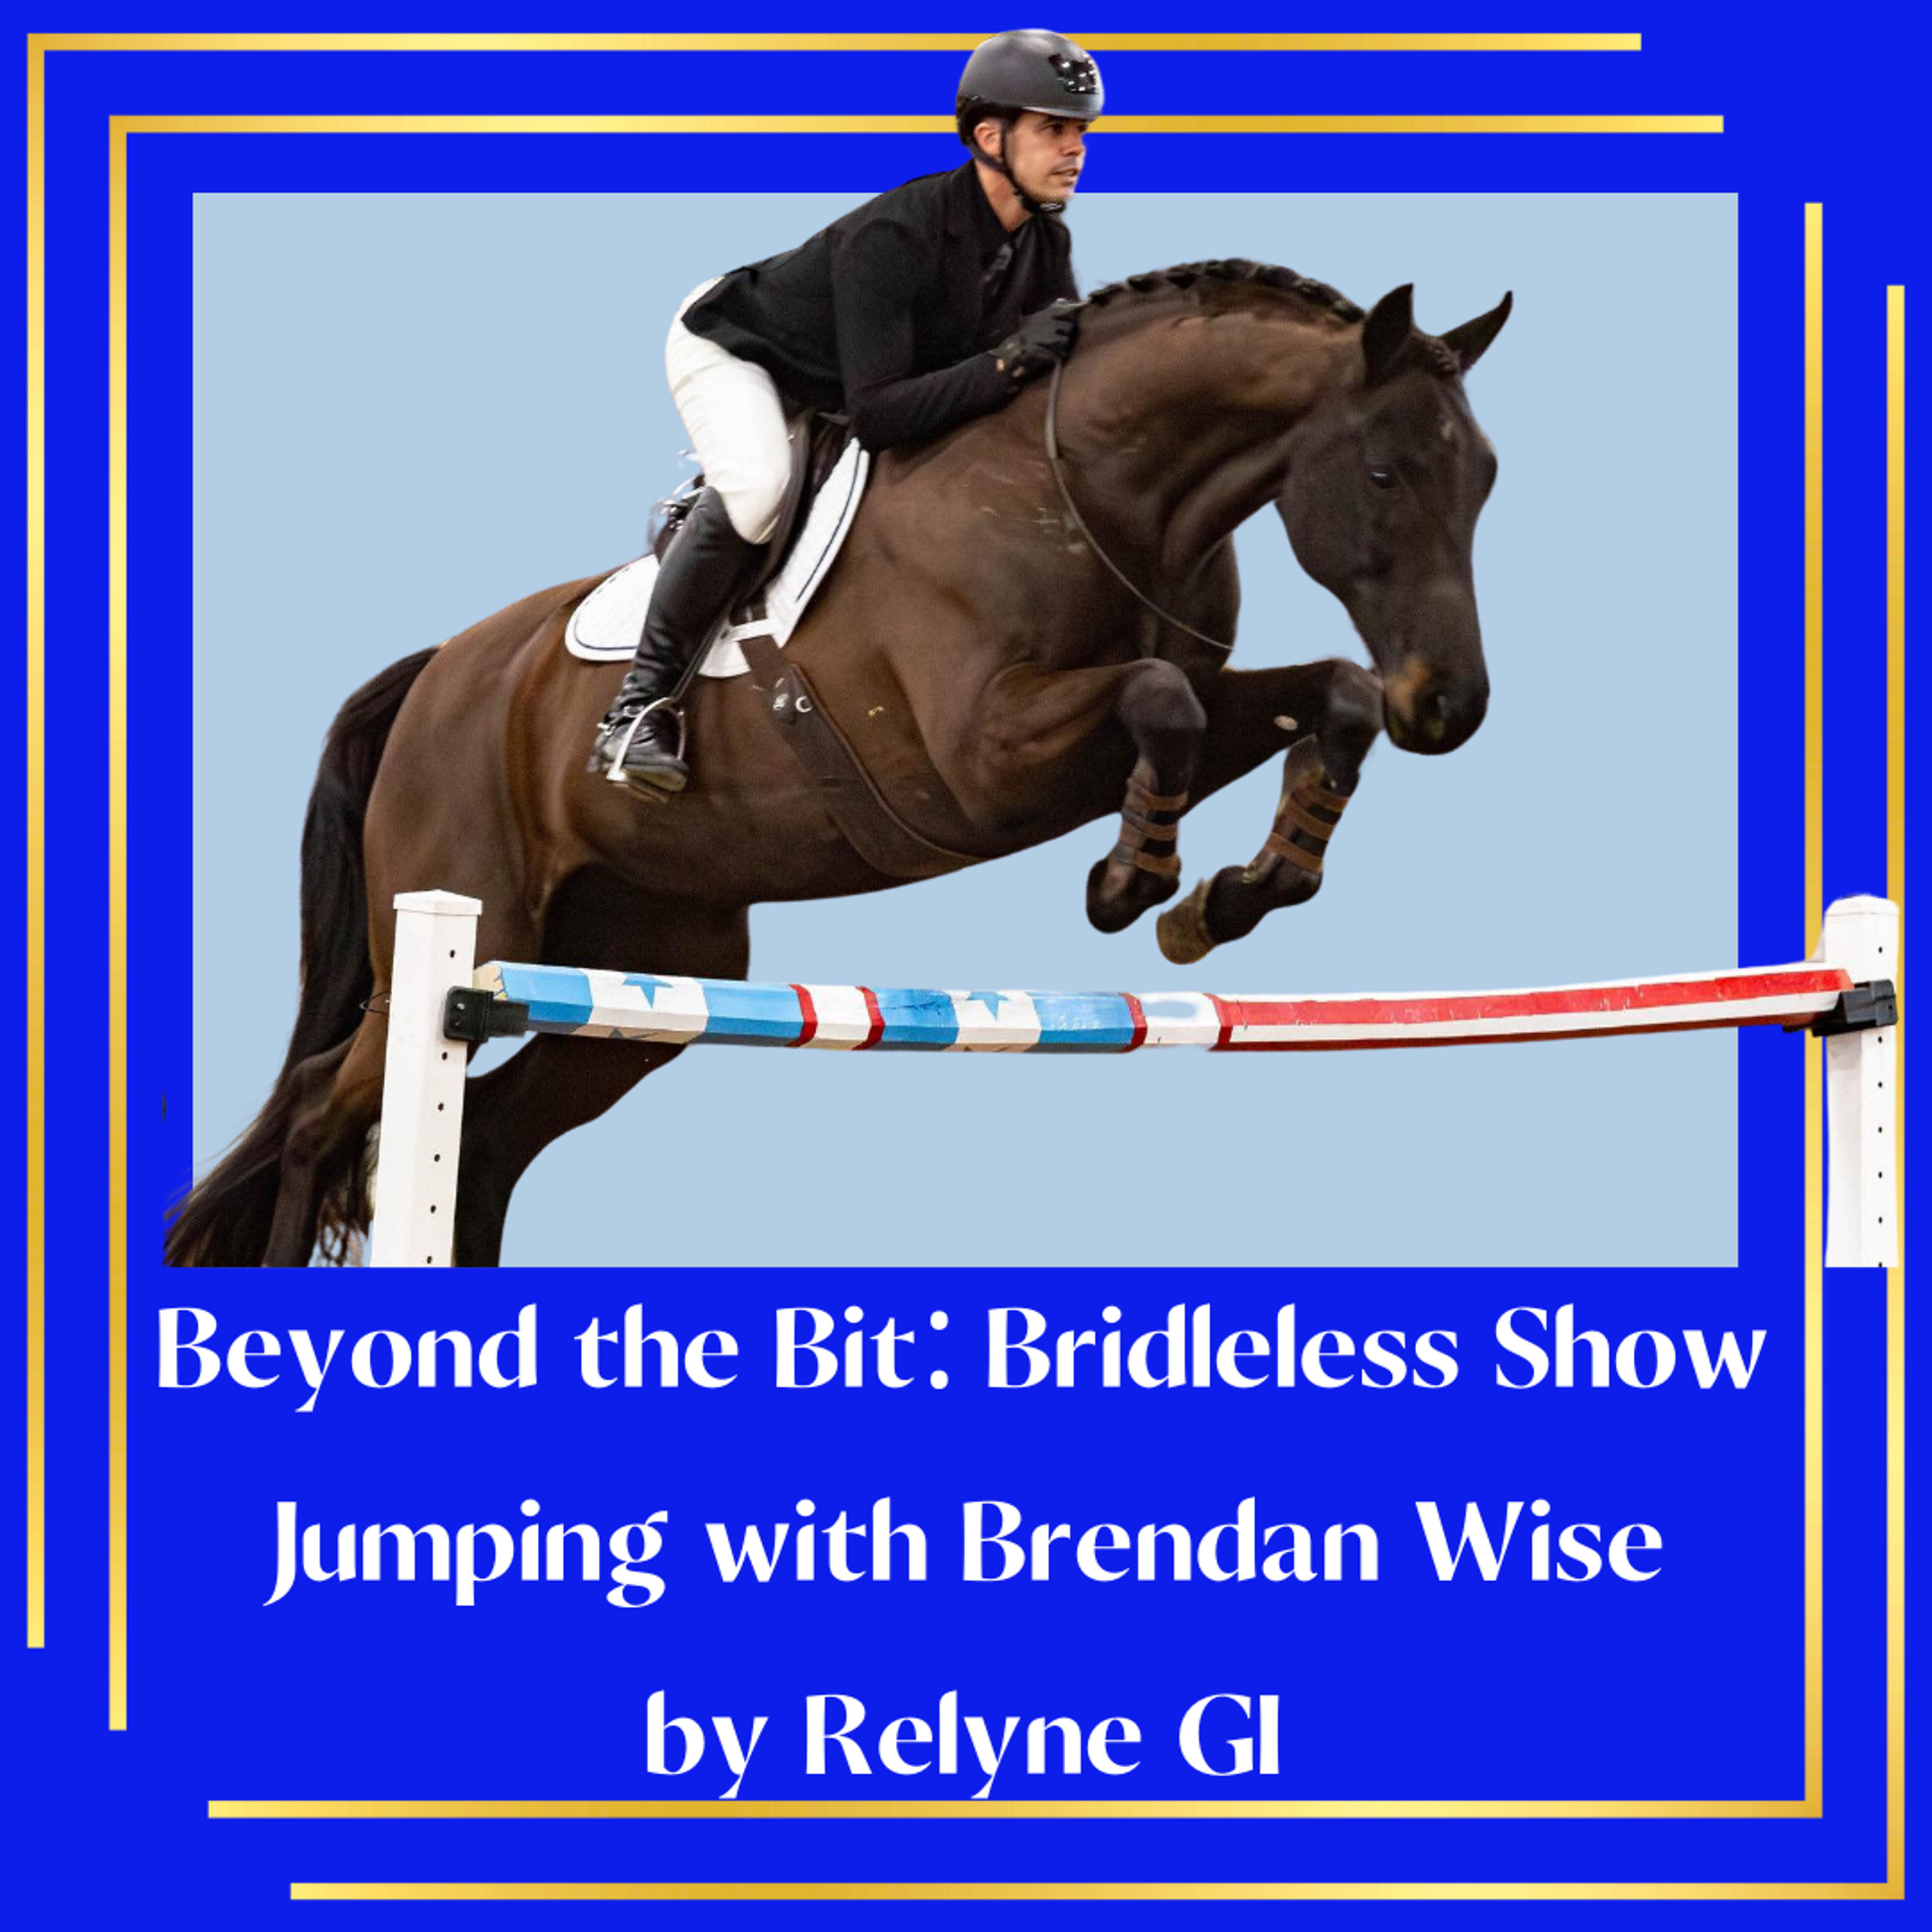 Beyond the Bit: Bridleless Show Jumping with Brendan Wise by Relyne GI - The Show Jumping Podcast